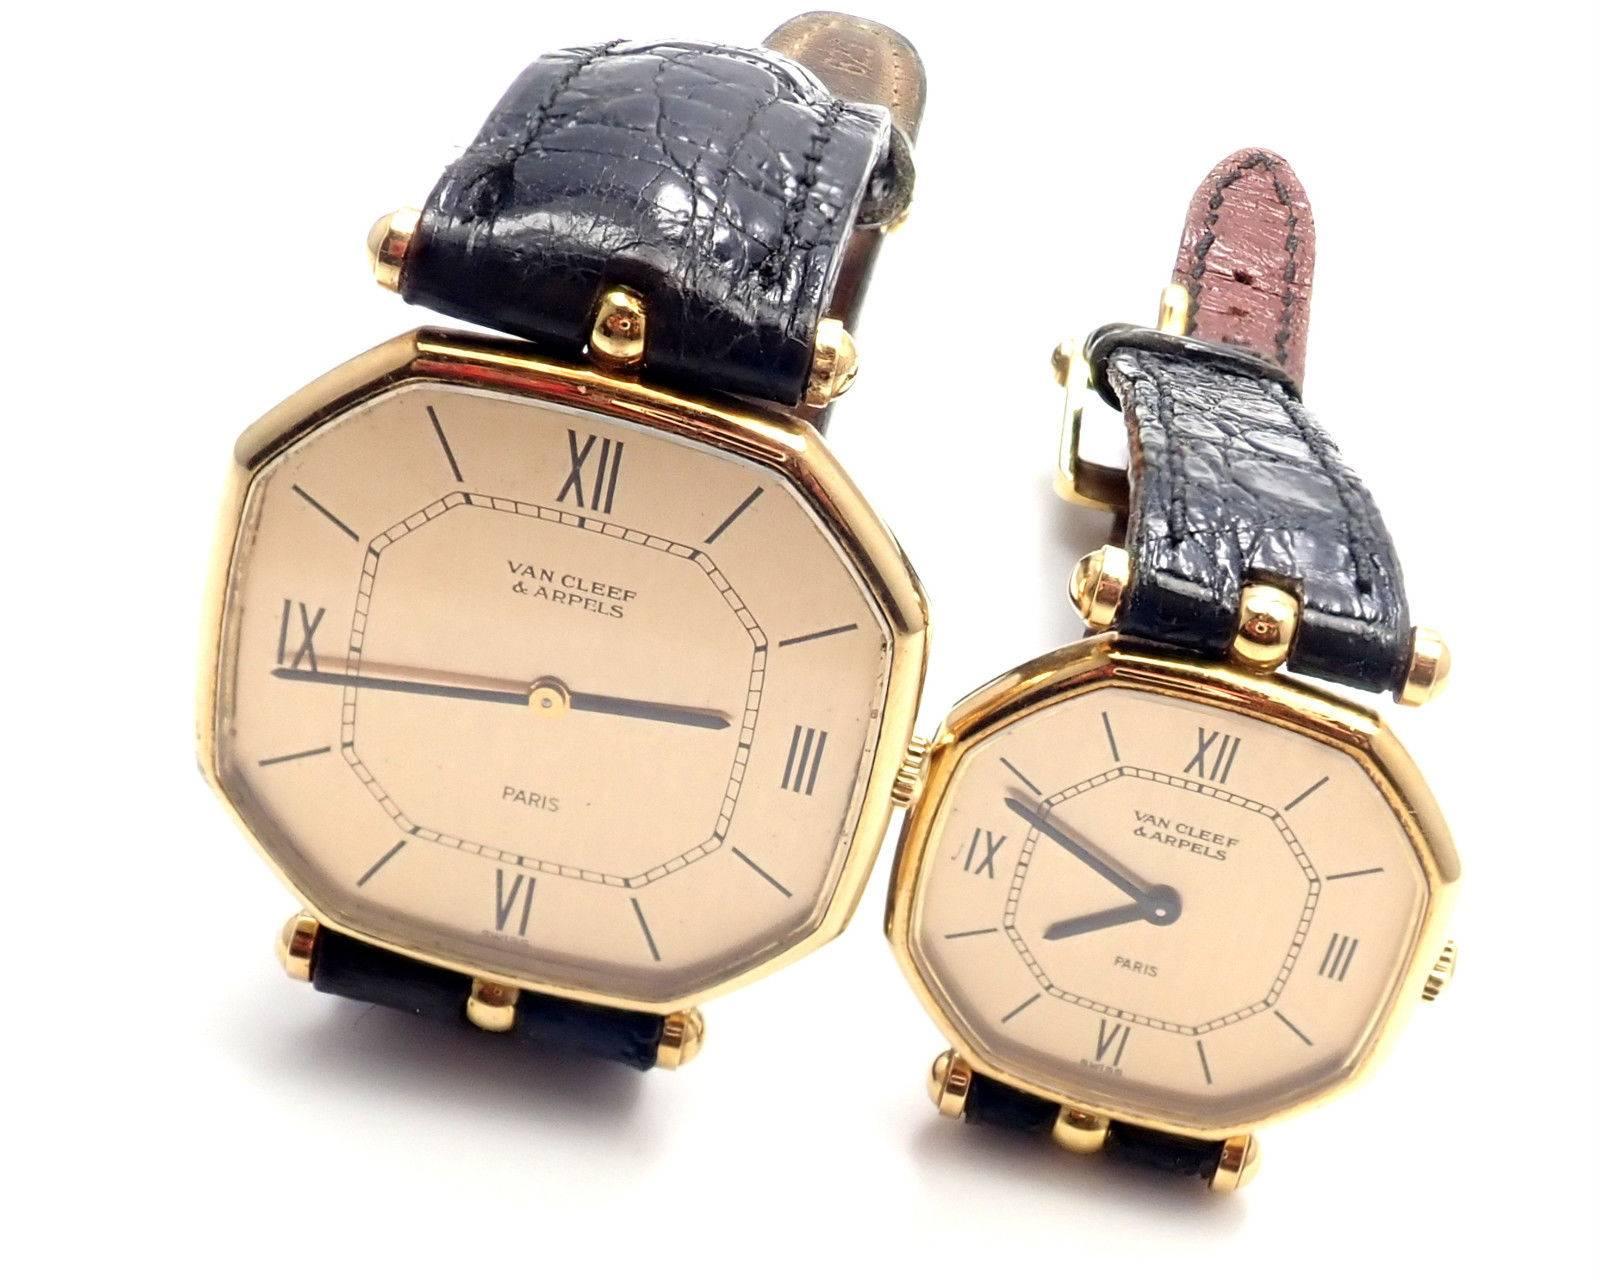 Very rare 18k yellow gold Jaeger LeCoultre set of two thin manual-wind watches by Van Cleef & Arpels. 
Details: 
Movement Type: Both Watches has Mechanical Manual Wind Movements
Bracelet Strap: Both bands are black leather with 18k yellow gold